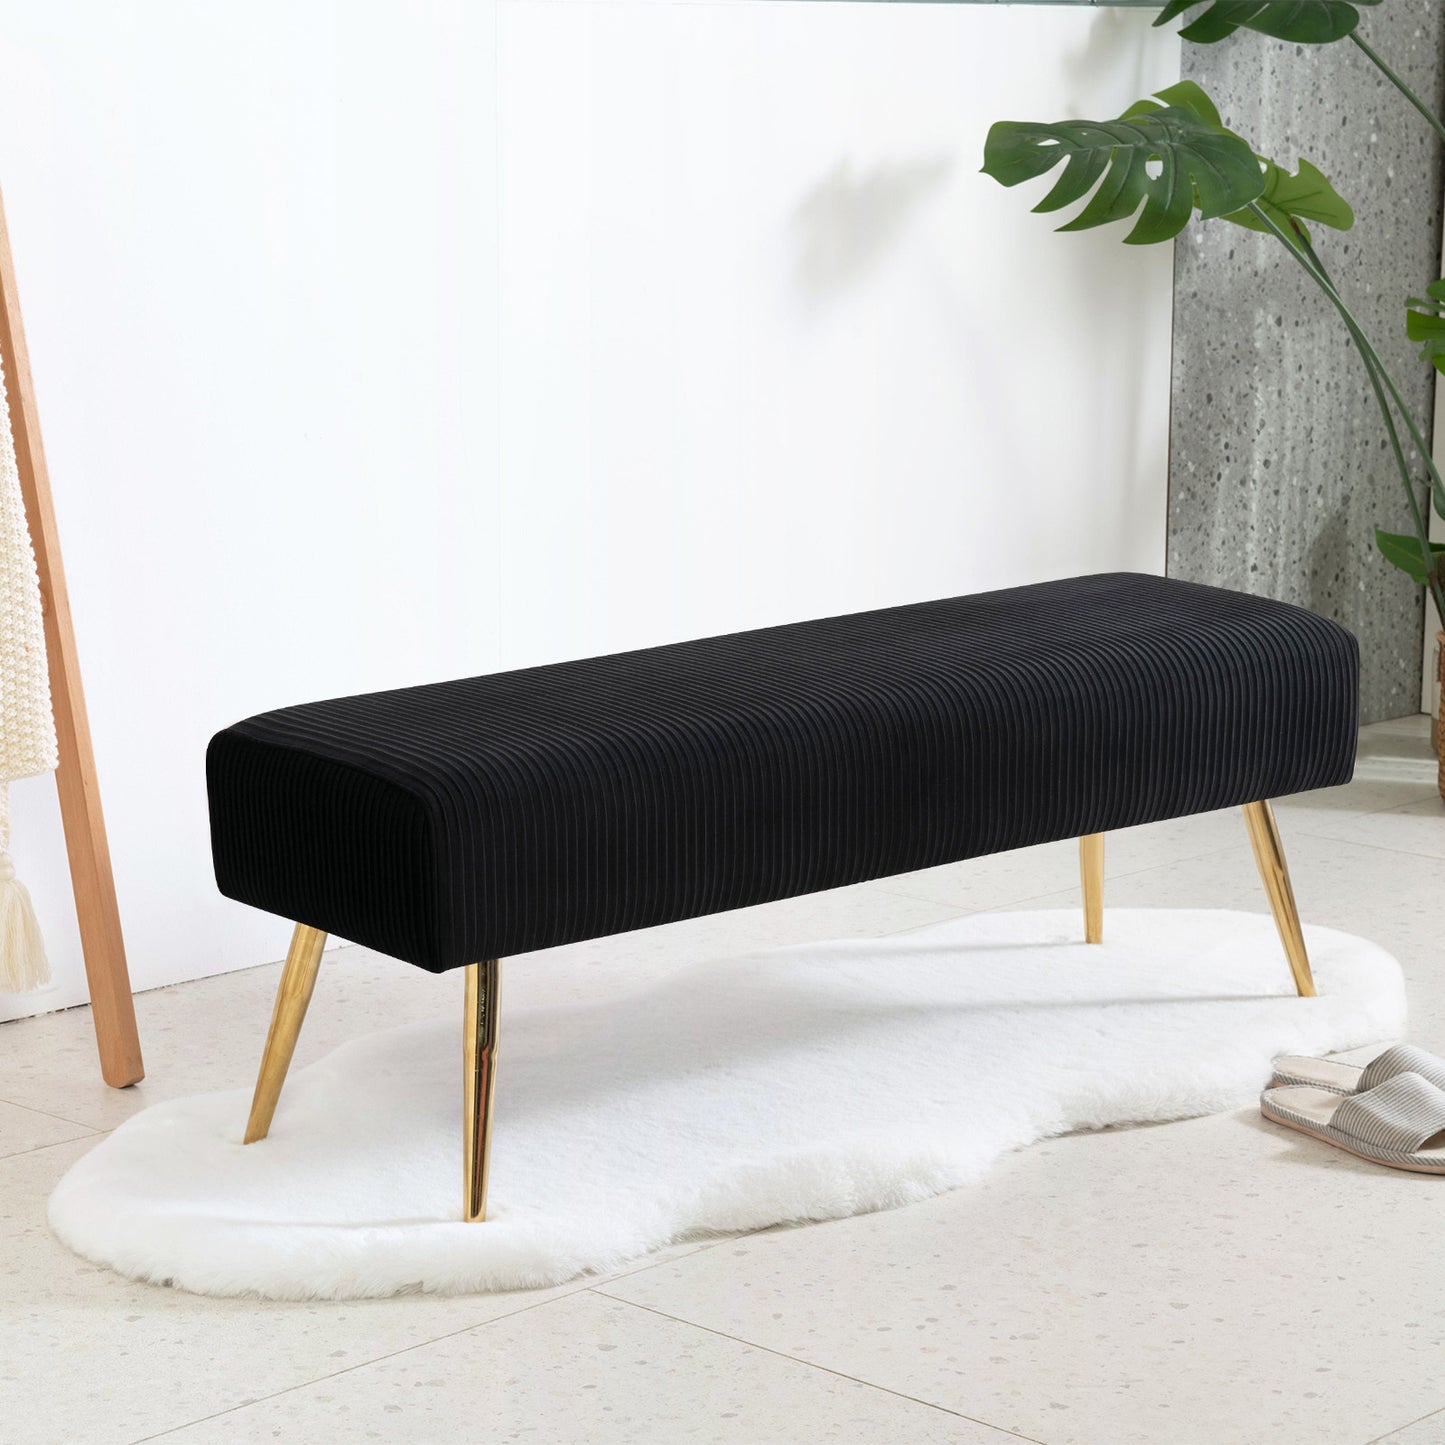 SYNGAR Upholstered Bench, Mid Century Modern Rectangular Footrest for Bedroom Entryway Channel, Velvet Fabric Bench for Bedroom End of Bed, Entryway Ottoman Bench with Gold Metal Legs, Black